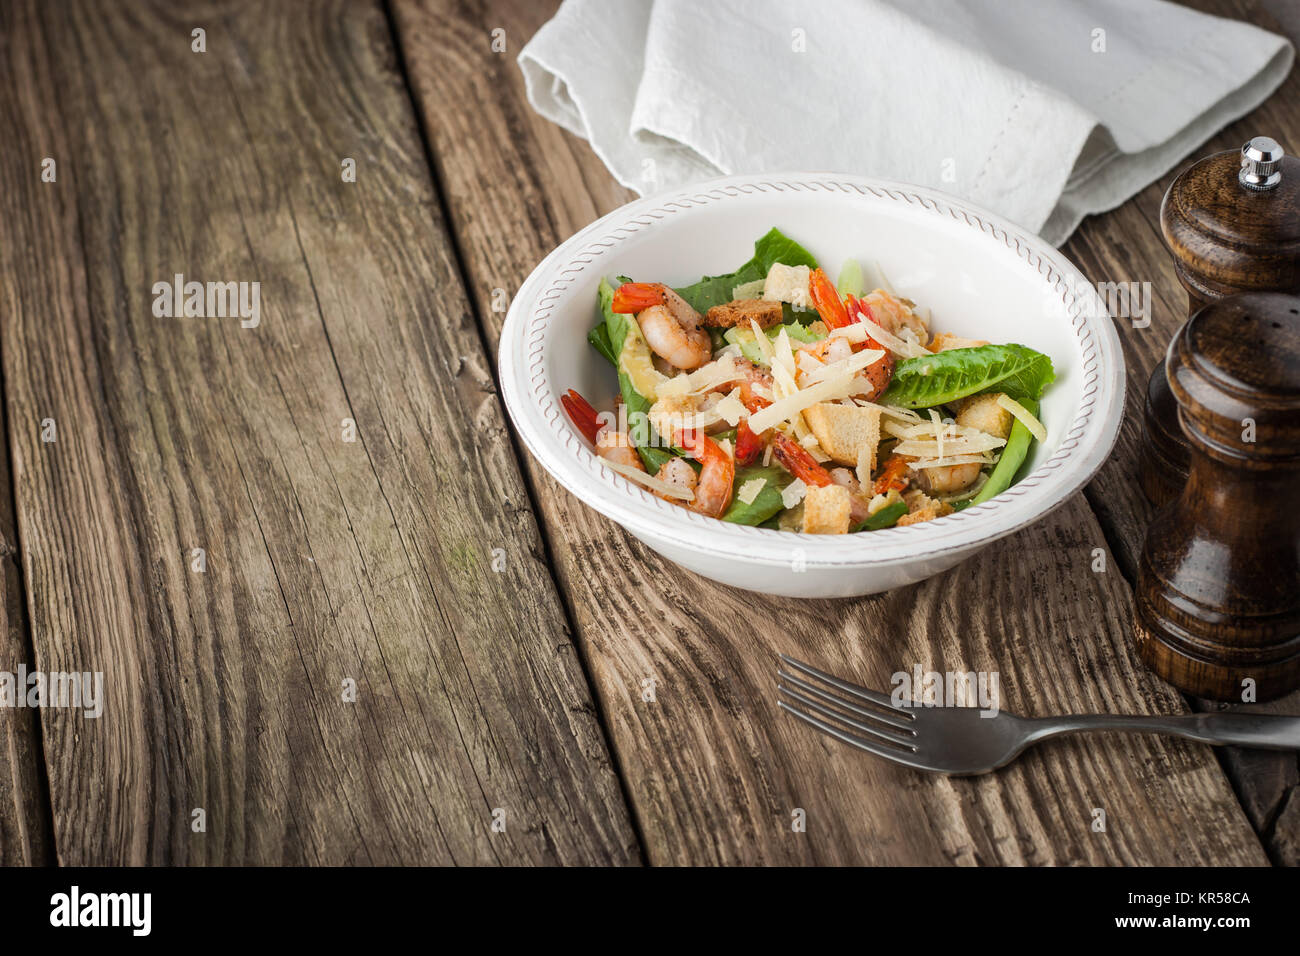 Salad with shrimps , croutons  and greens on the wooden table horizontal Stock Photo